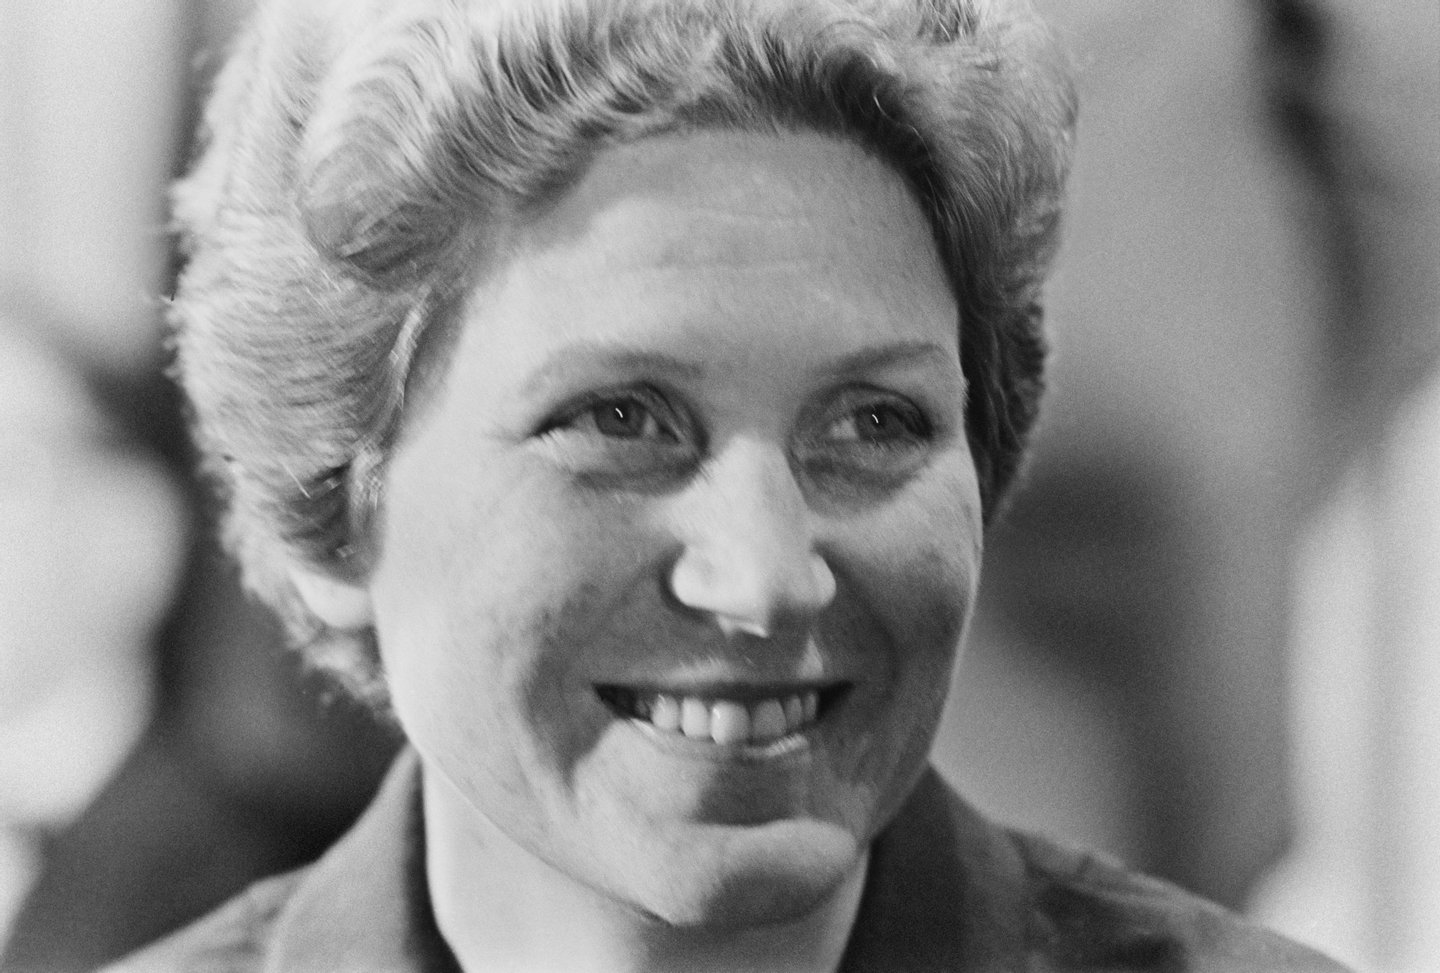 Svetlana Alliluyeva, the daughter of Joseph Stalin, at a press conference in New York City, USA, 1967. (Photo by Harry Benson/Express/Hulton Archive/Getty Images)